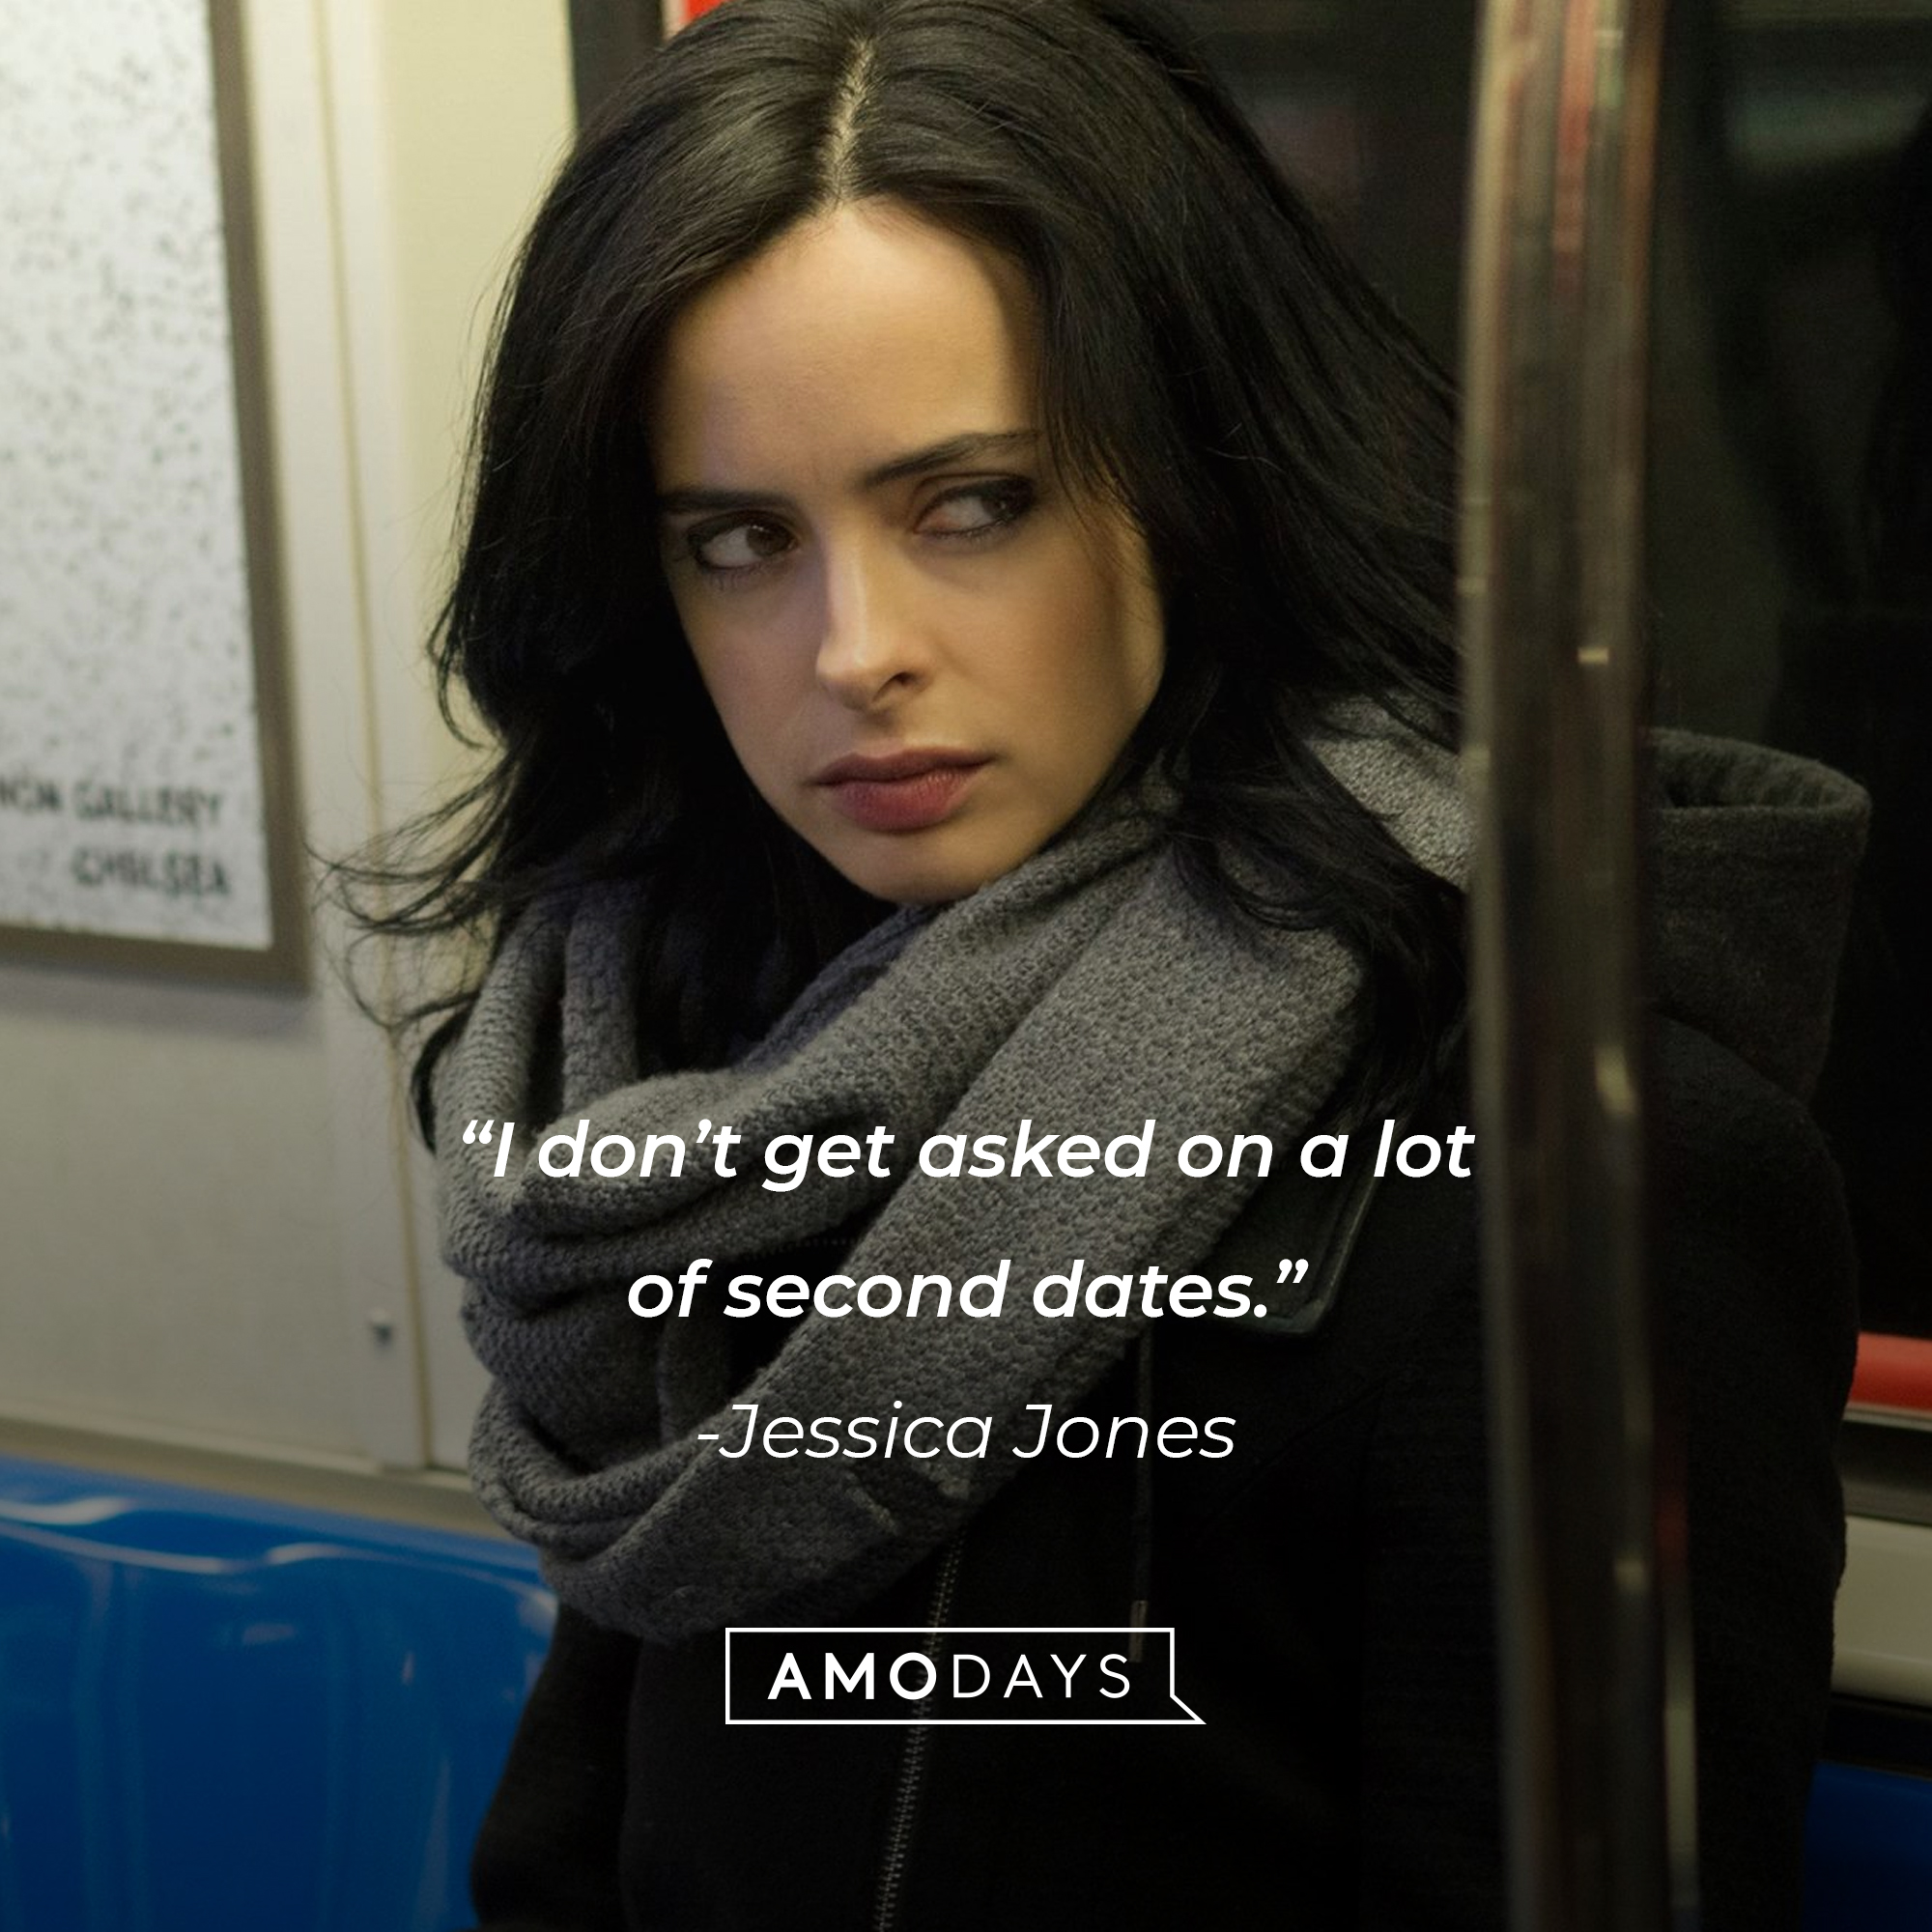 An image of Jessica Jones with her quote:  “I don’t get asked on a lot of second dates.”┃Source:facebook.com/JessicaJonesLat